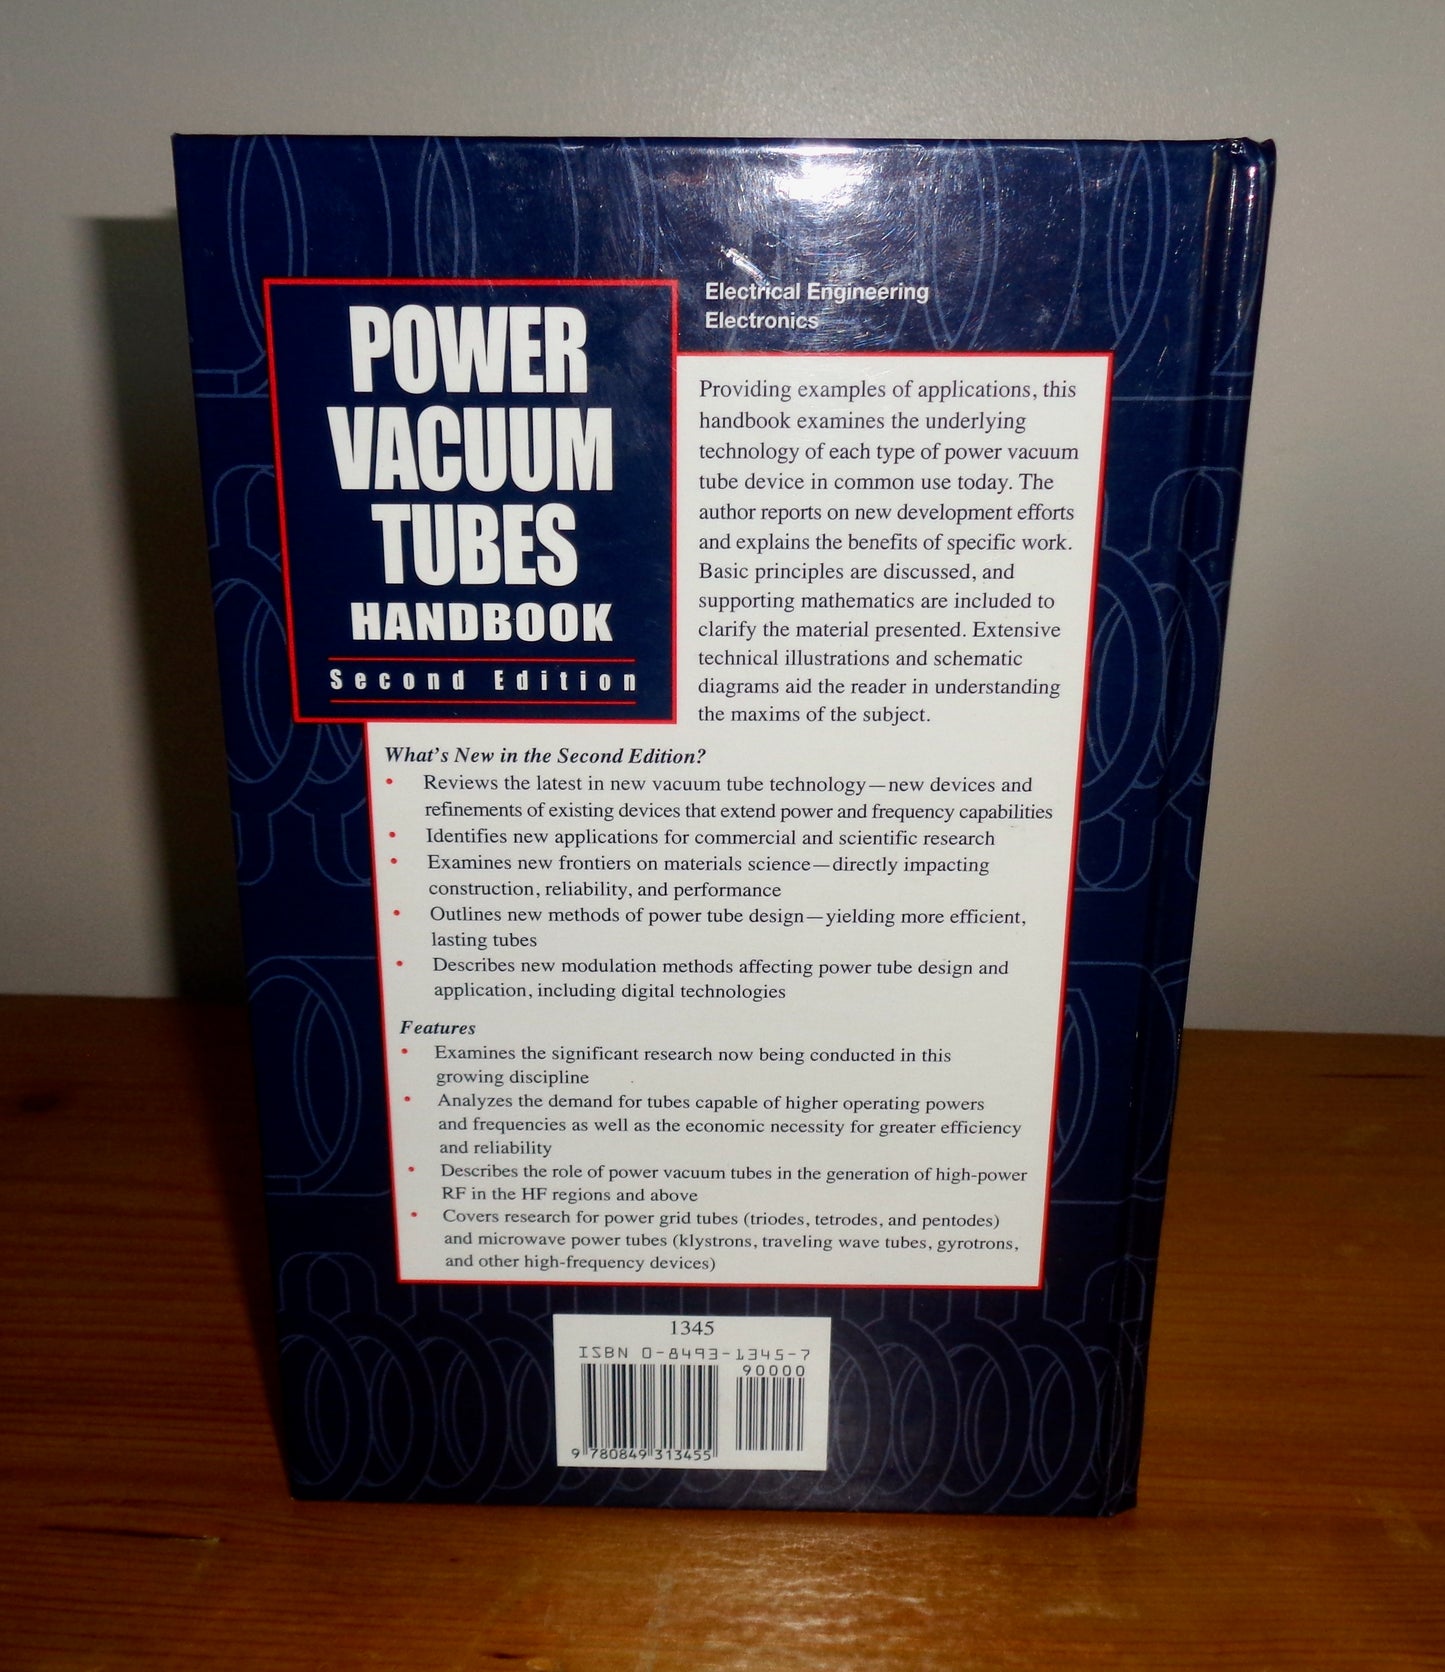 1999 Power Vacuum Tubes Handbook Second Edition By Jerry C Whitaker ISBN 0849313457